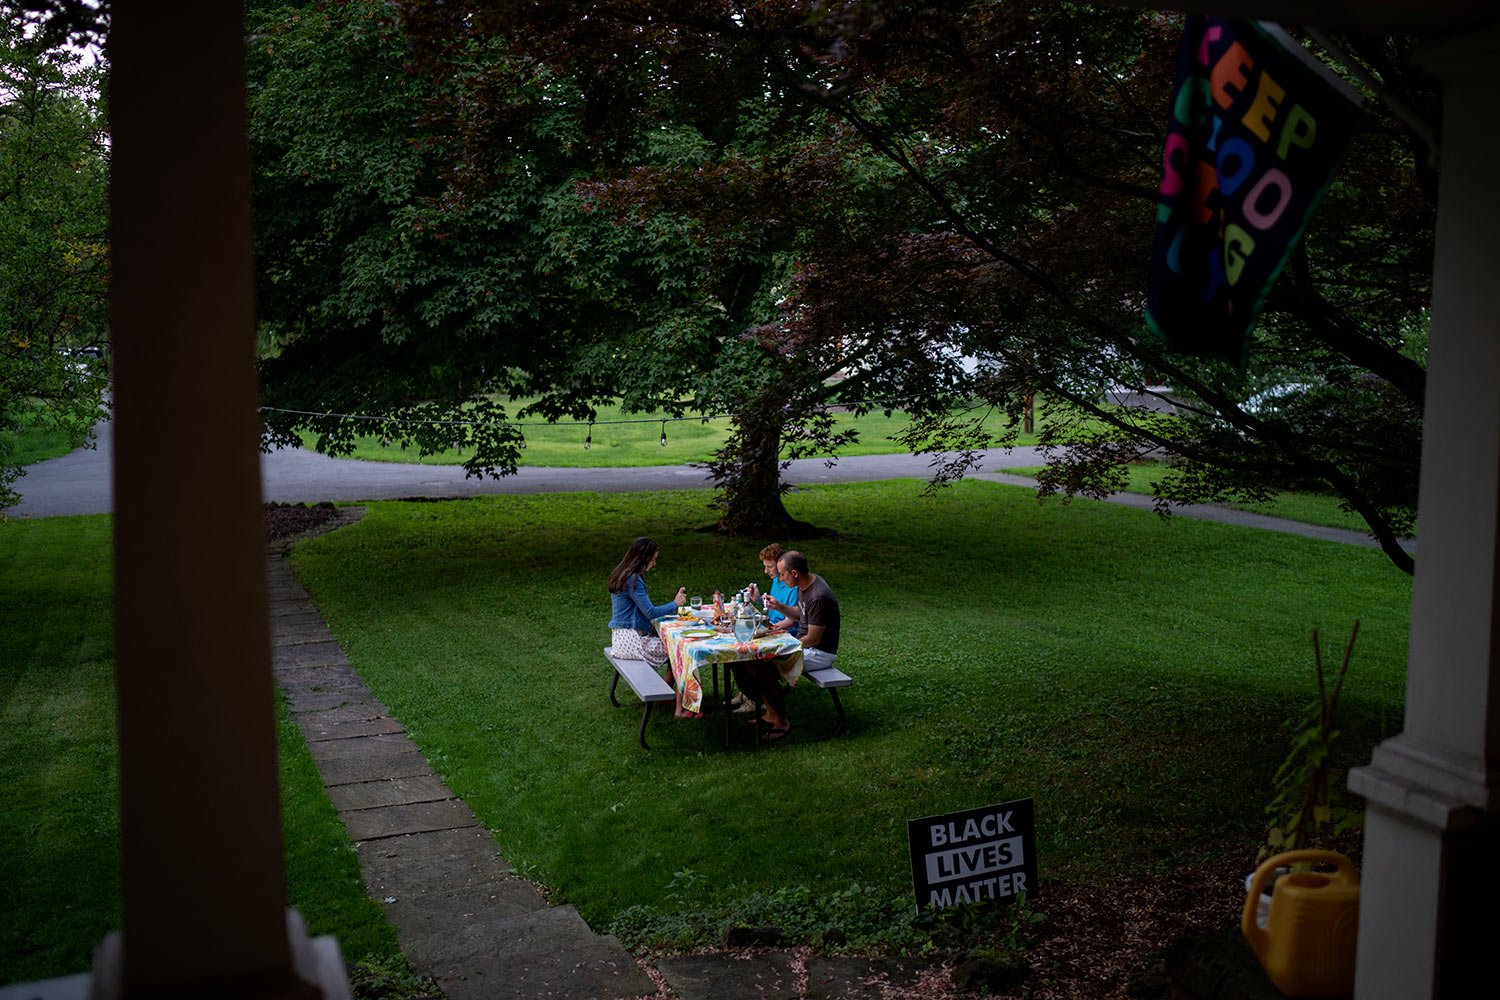  Rev. Stephen Cady, right, has dinner with this children, Ellie, 16, left, and Charlie, 14, outside their home in Rochester, N.Y.,  Monday, Aug. 21, 2023. (AP Photo/David Goldman)  